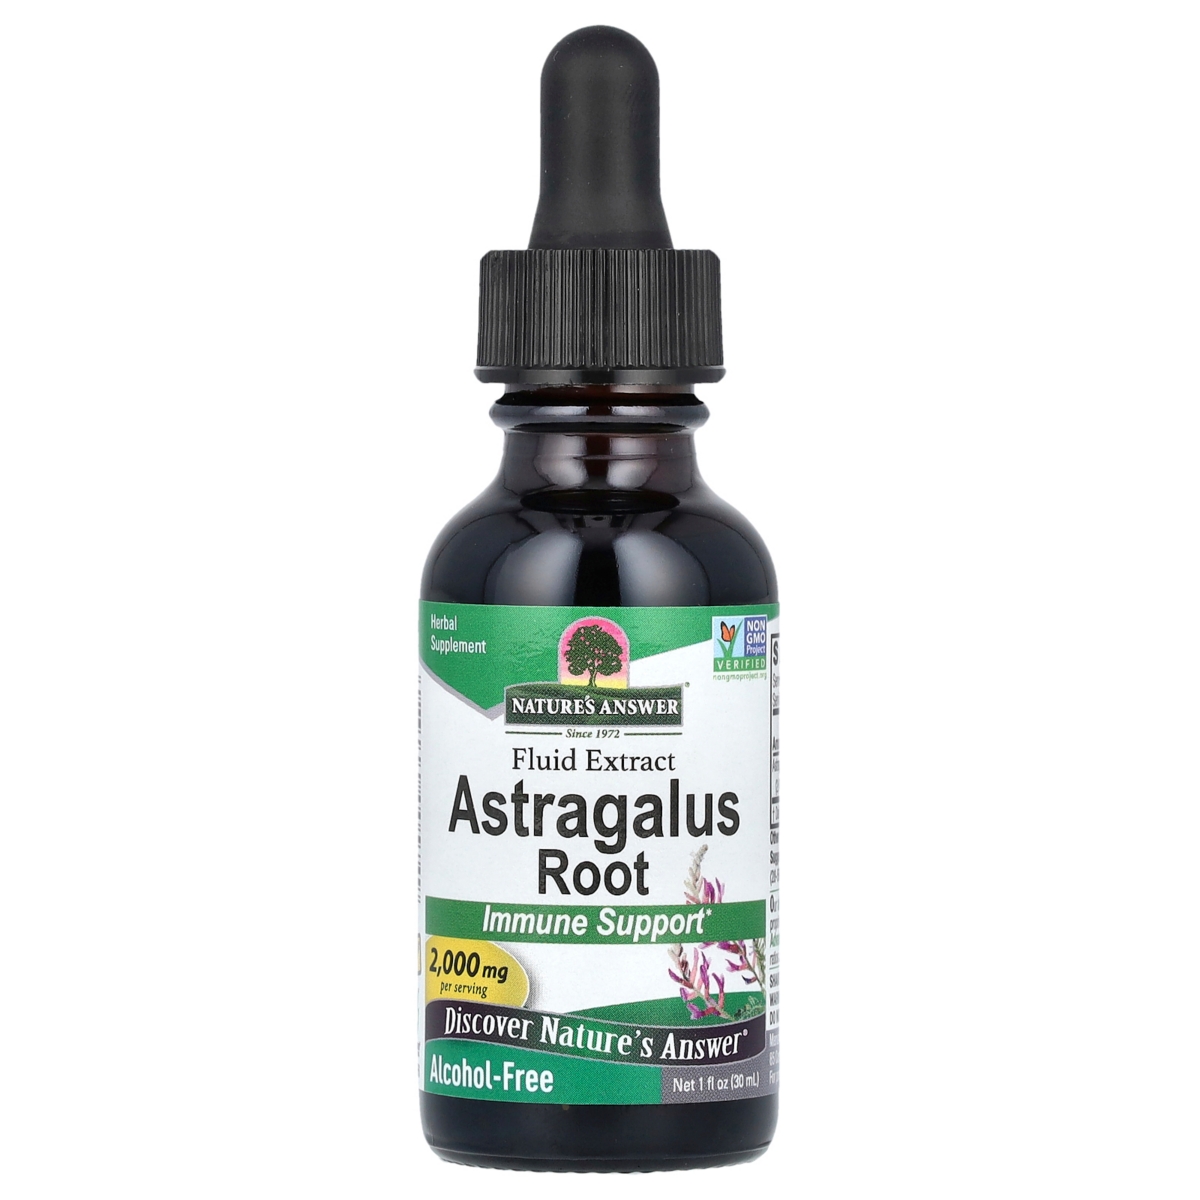 Astragalus Root Fluid Extract Alcohol-Free 2 000 mg - 1 fl oz (30 ml) - Assorted Pre-pack (See Table